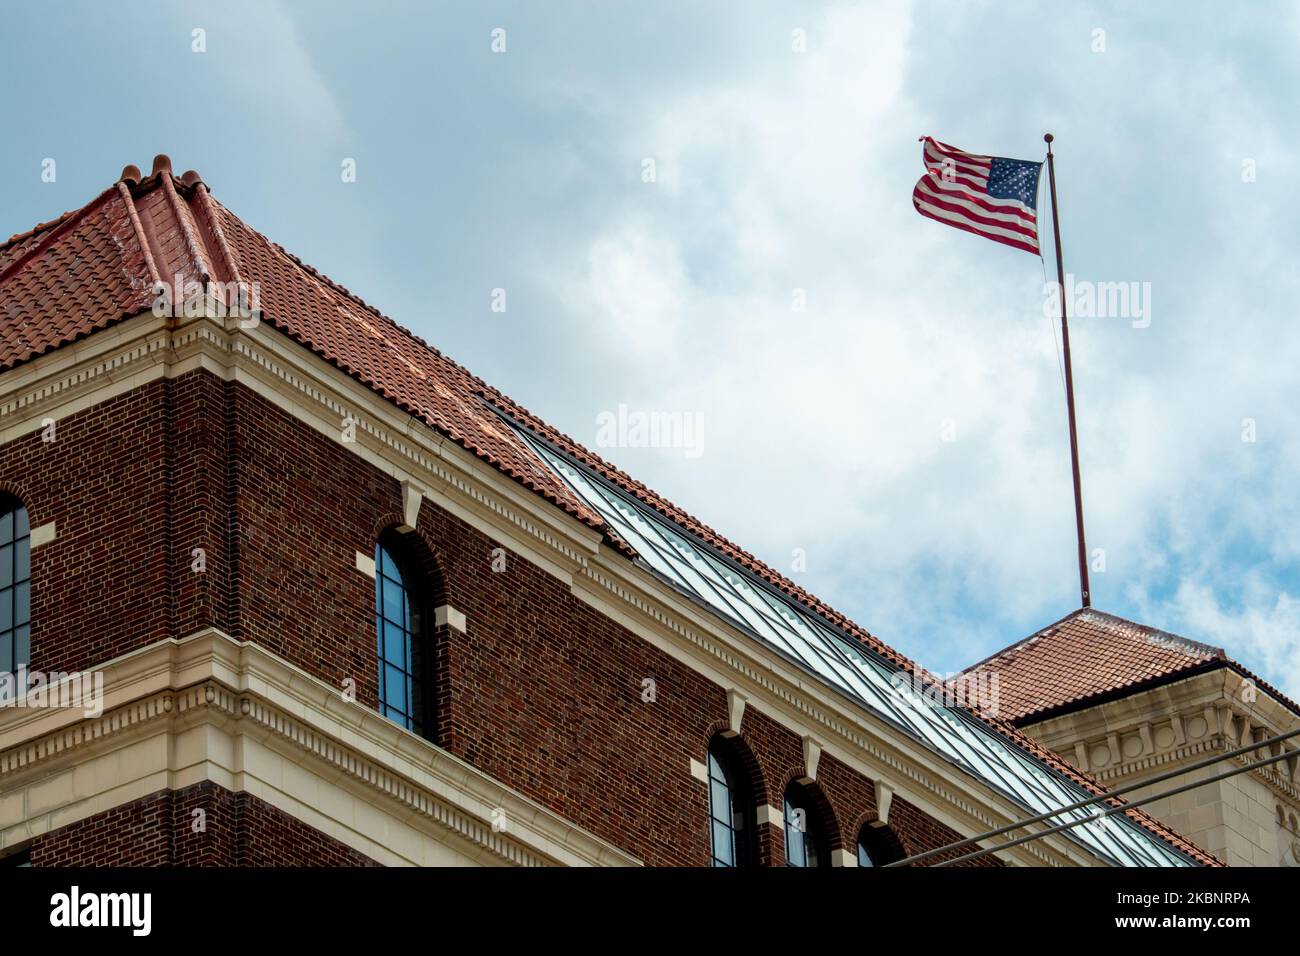 An American flag blows in the wind atop the Baldwin Building in the wake of the Coronavirus COVID-19 pandemic, Thursday, May 14, 2020, in Cincinnati, Ohio, United States. (Photo by Jason Whitman/NurPhoto) Stock Photo